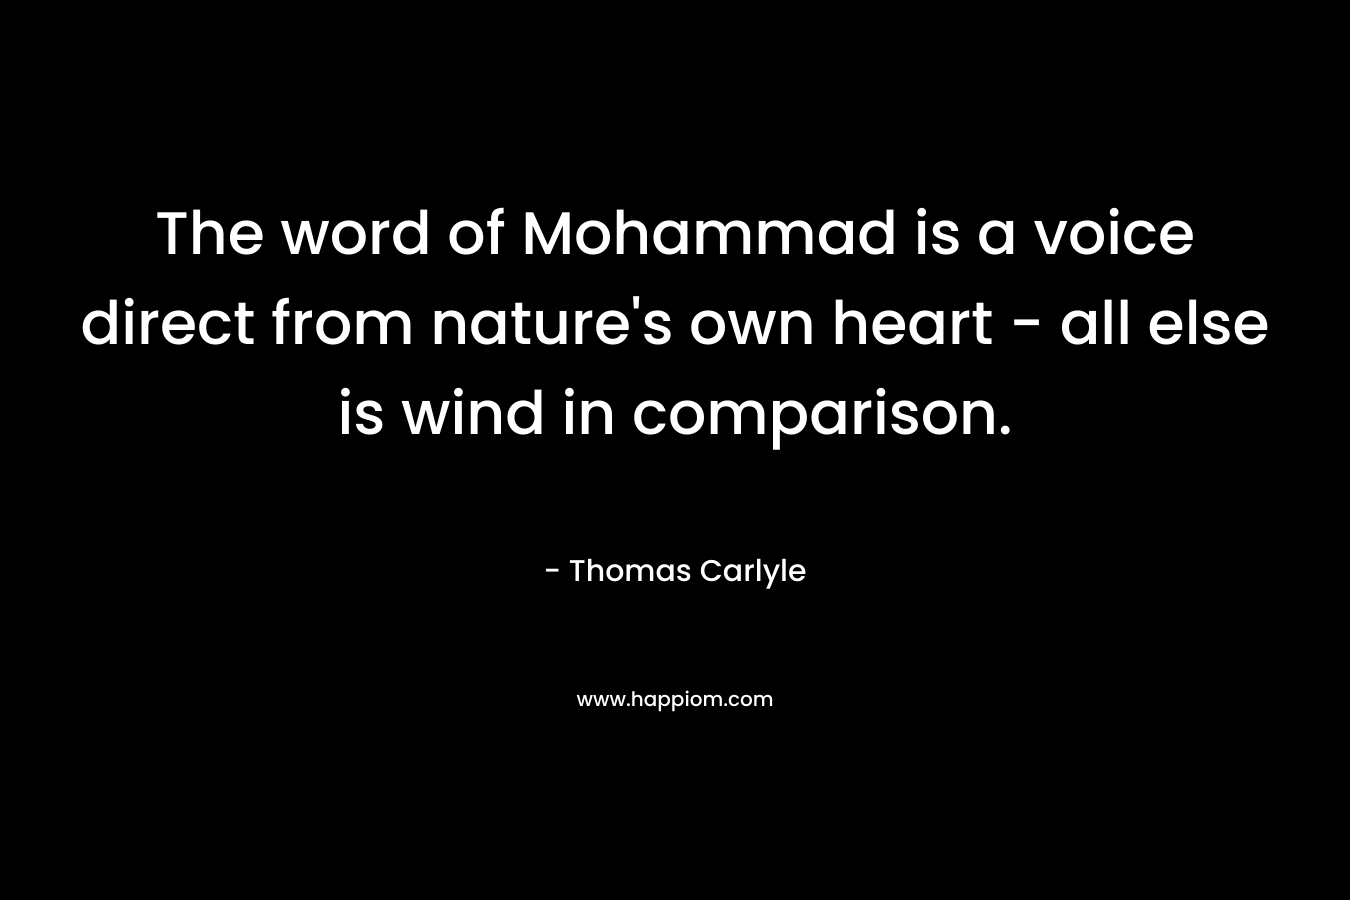 The word of Mohammad is a voice direct from nature’s own heart – all else is wind in comparison. – Thomas Carlyle